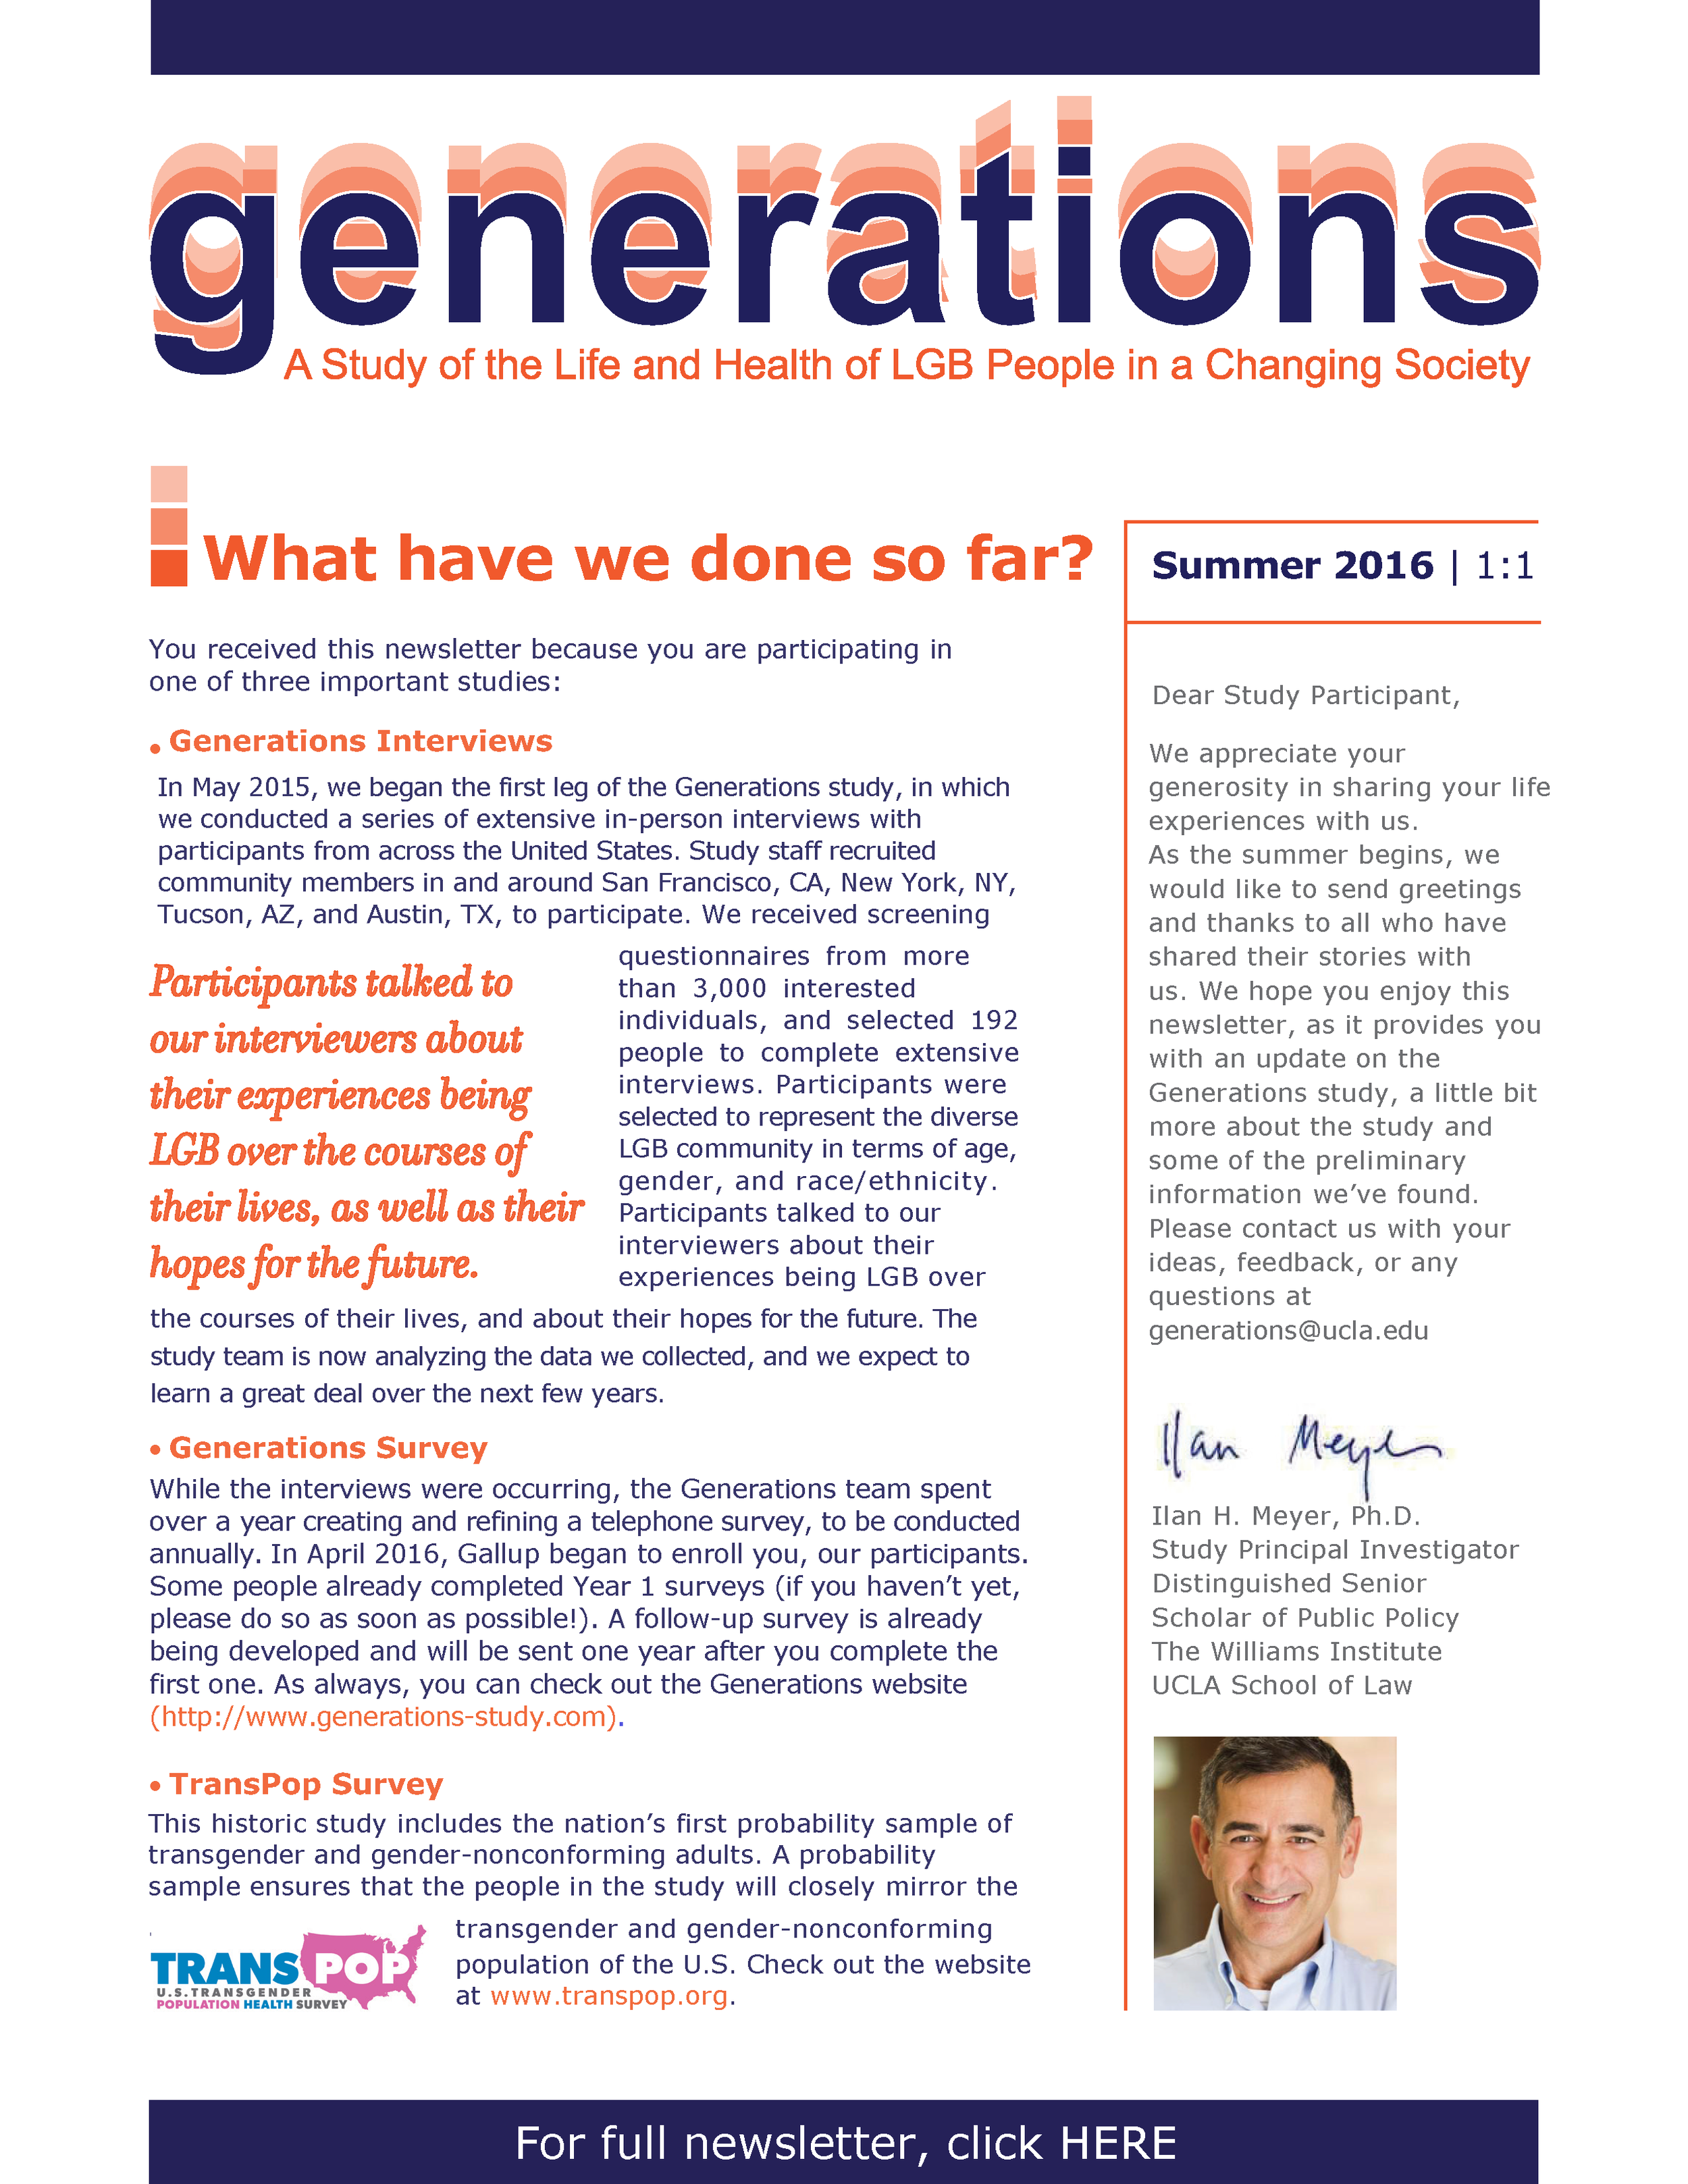 UCLAWI_GenerationsNewsletter_Summer2016_PRESS_final (new email add)_Page_1.png